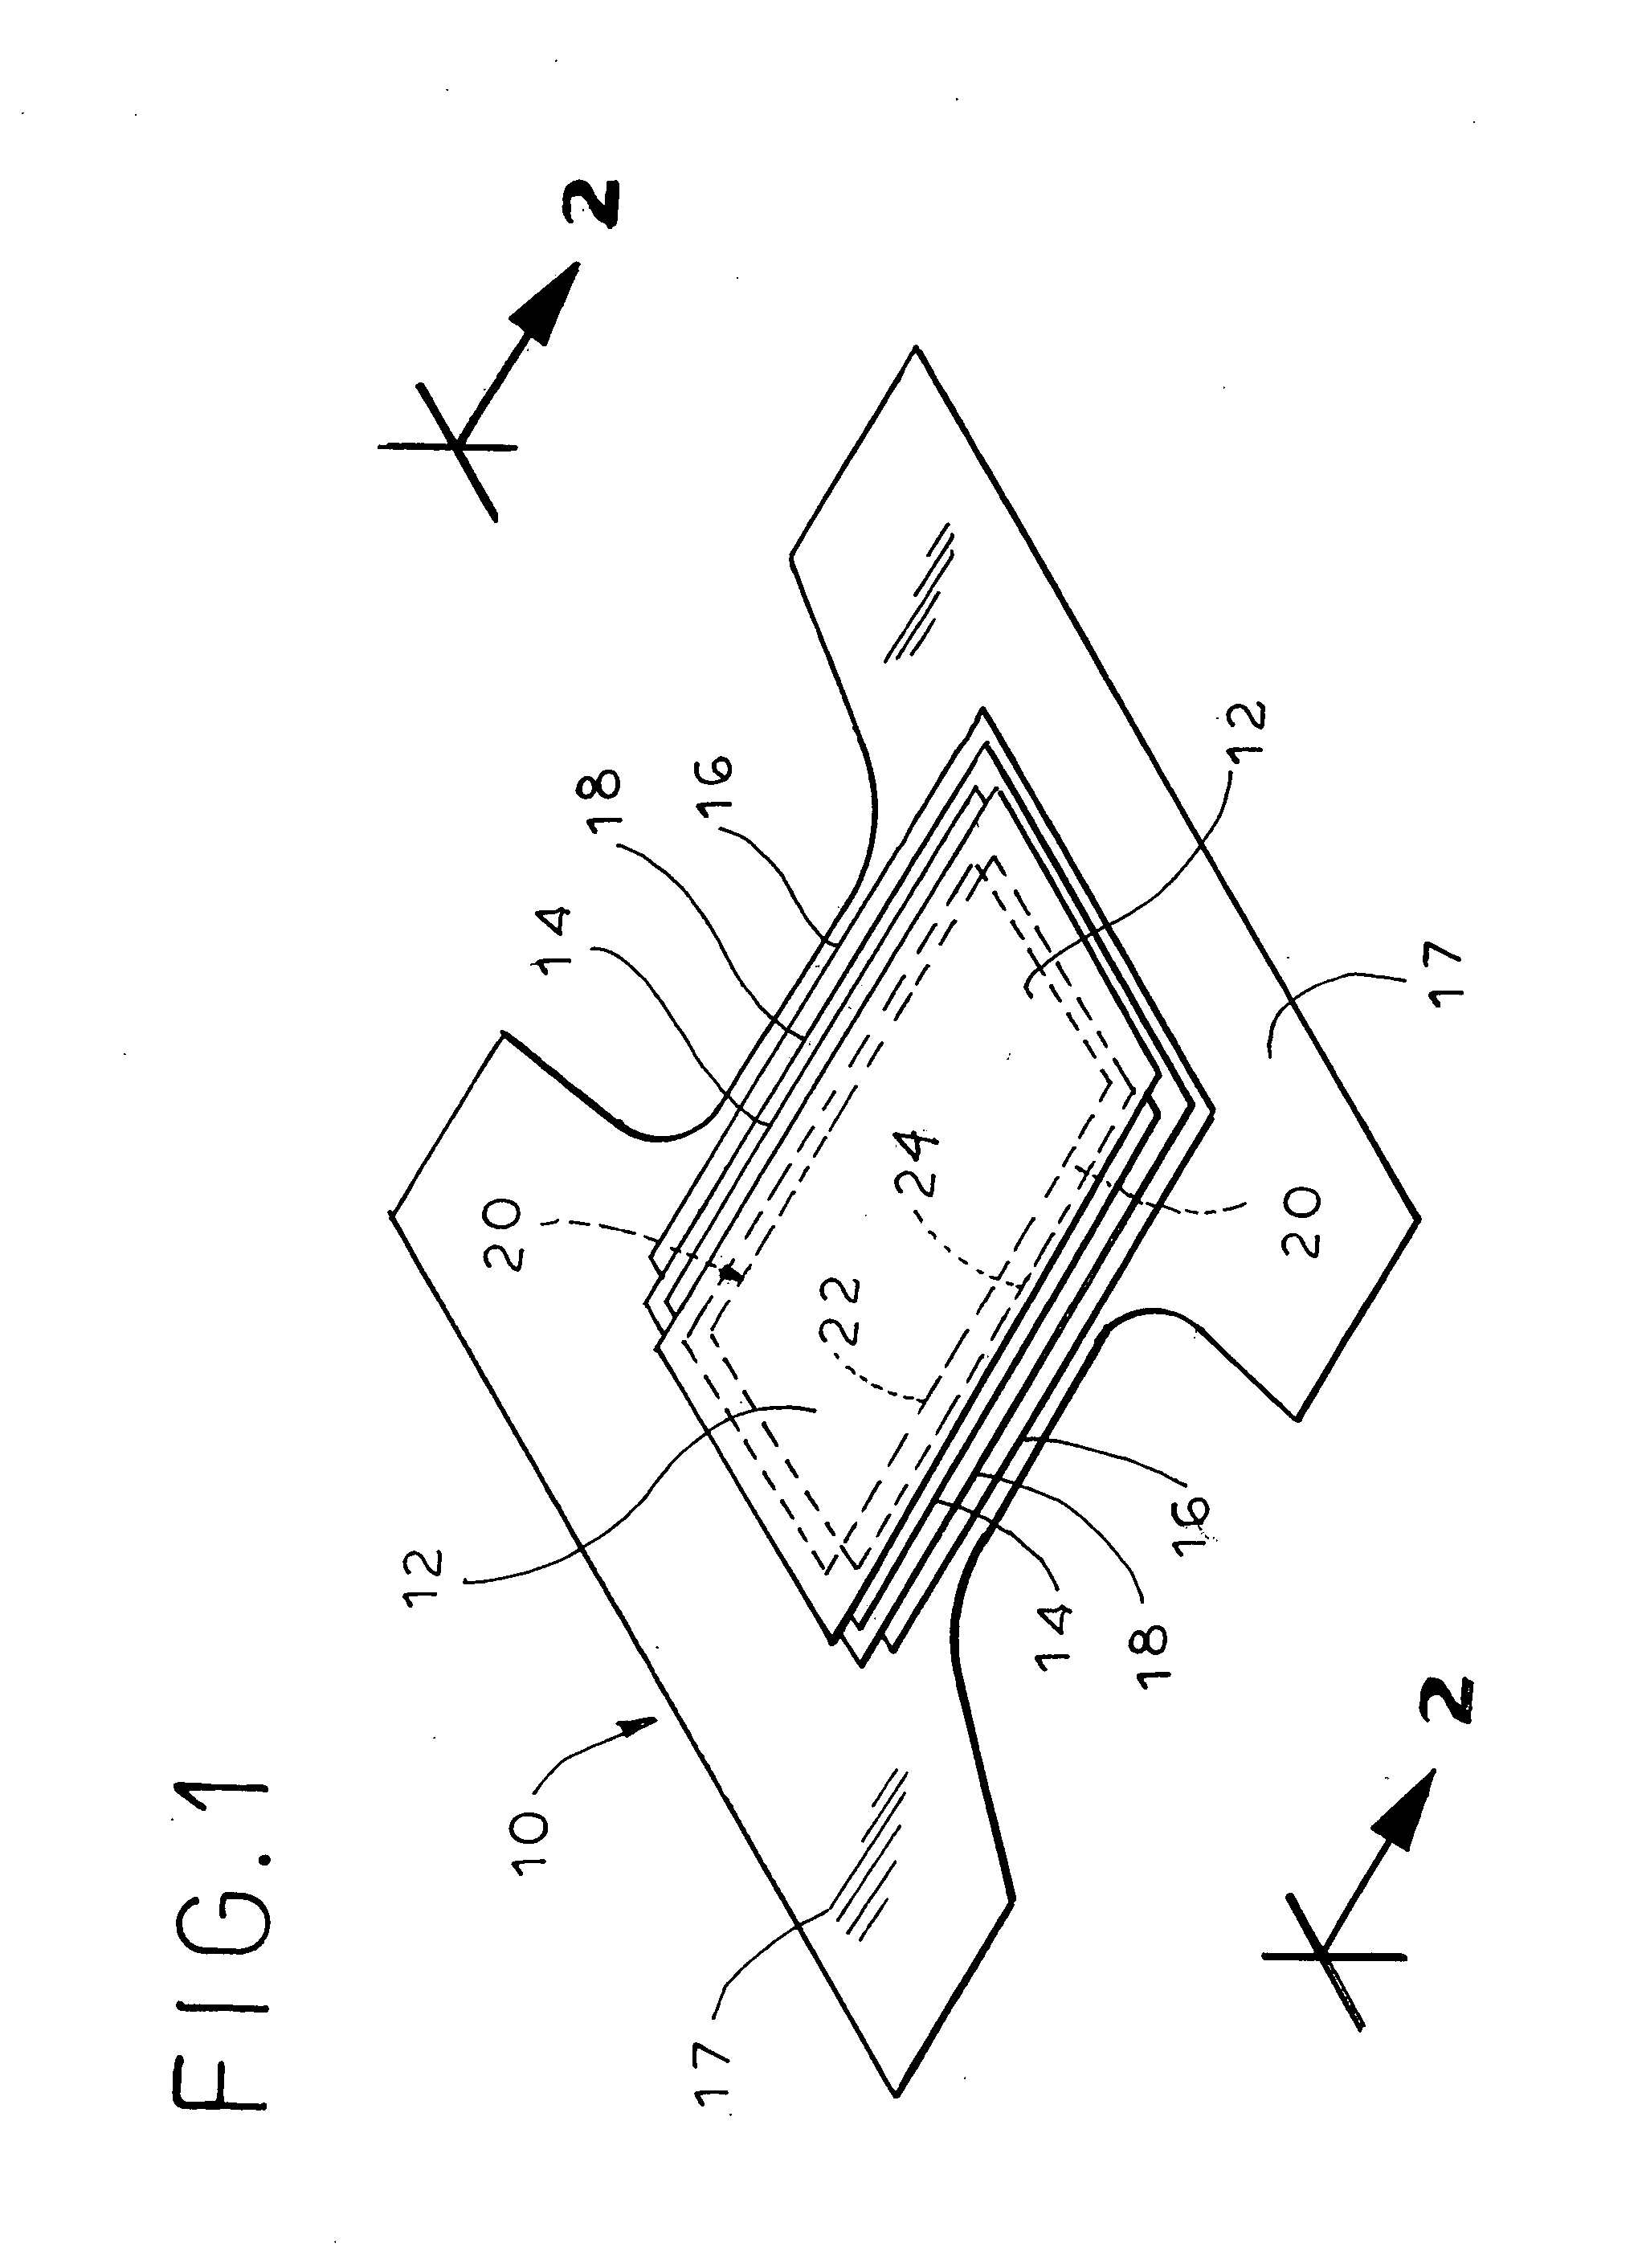 Absorbent article with layered acquisition/distribution system